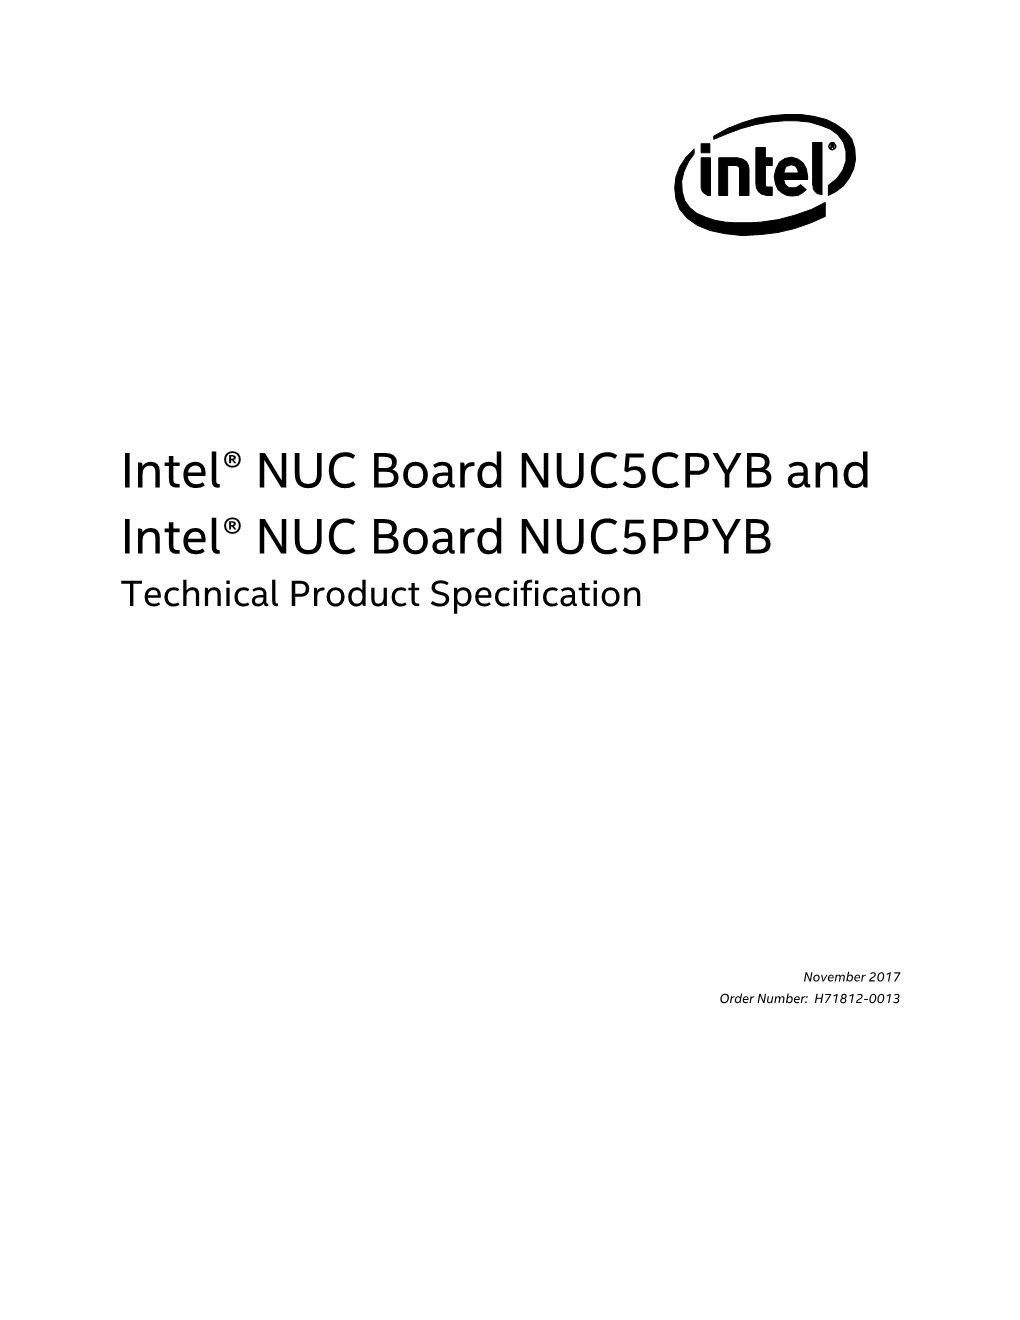 Intel® NUC Board NUC5CPYB and Intel® NUC Board NUC5PPYB Technical Product Specification